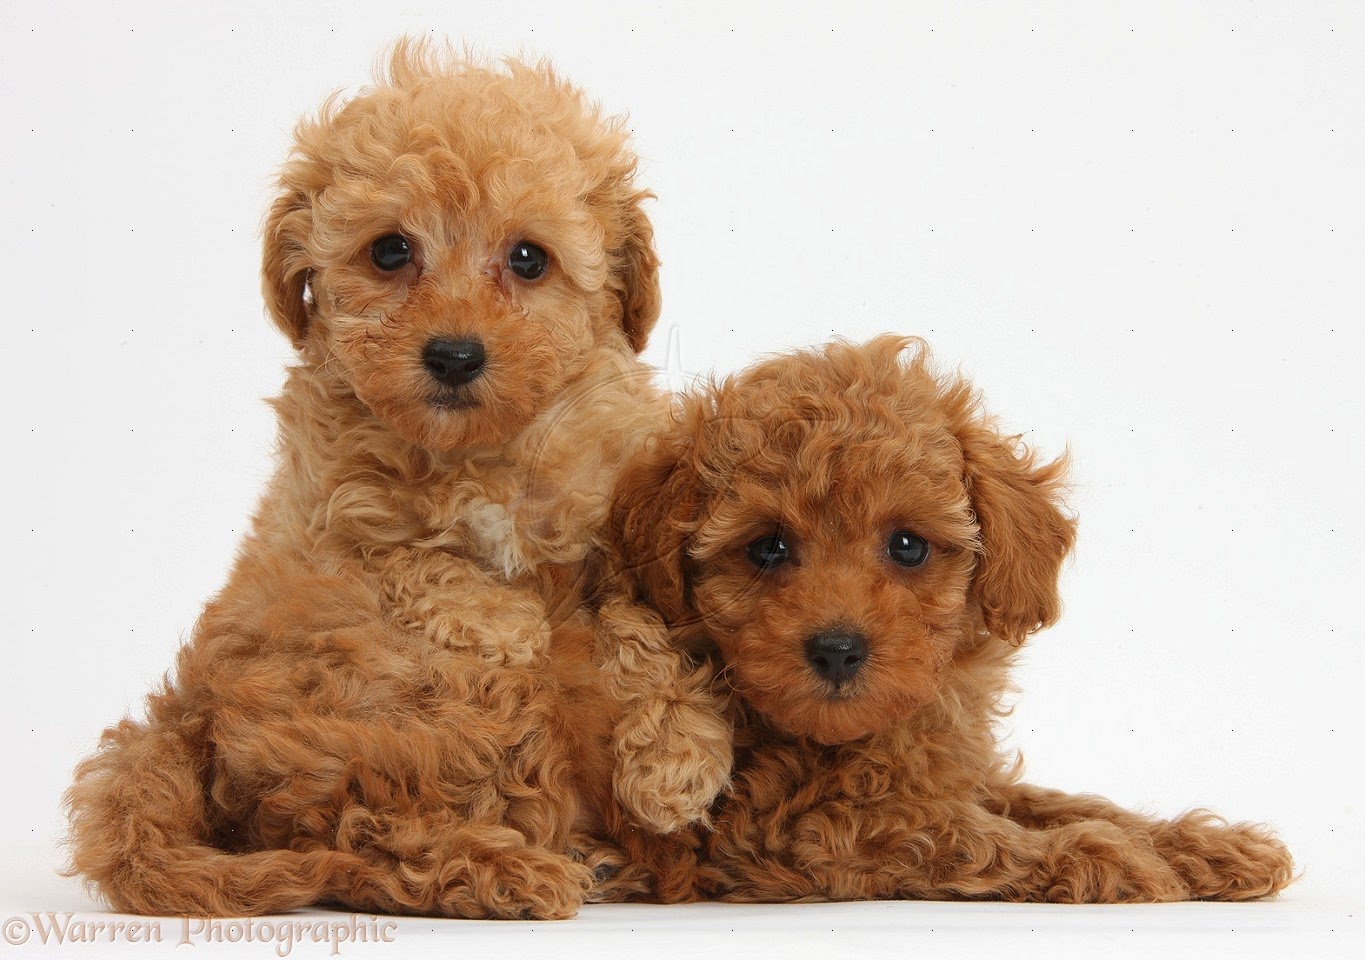 Two Brown Poodle Dogs